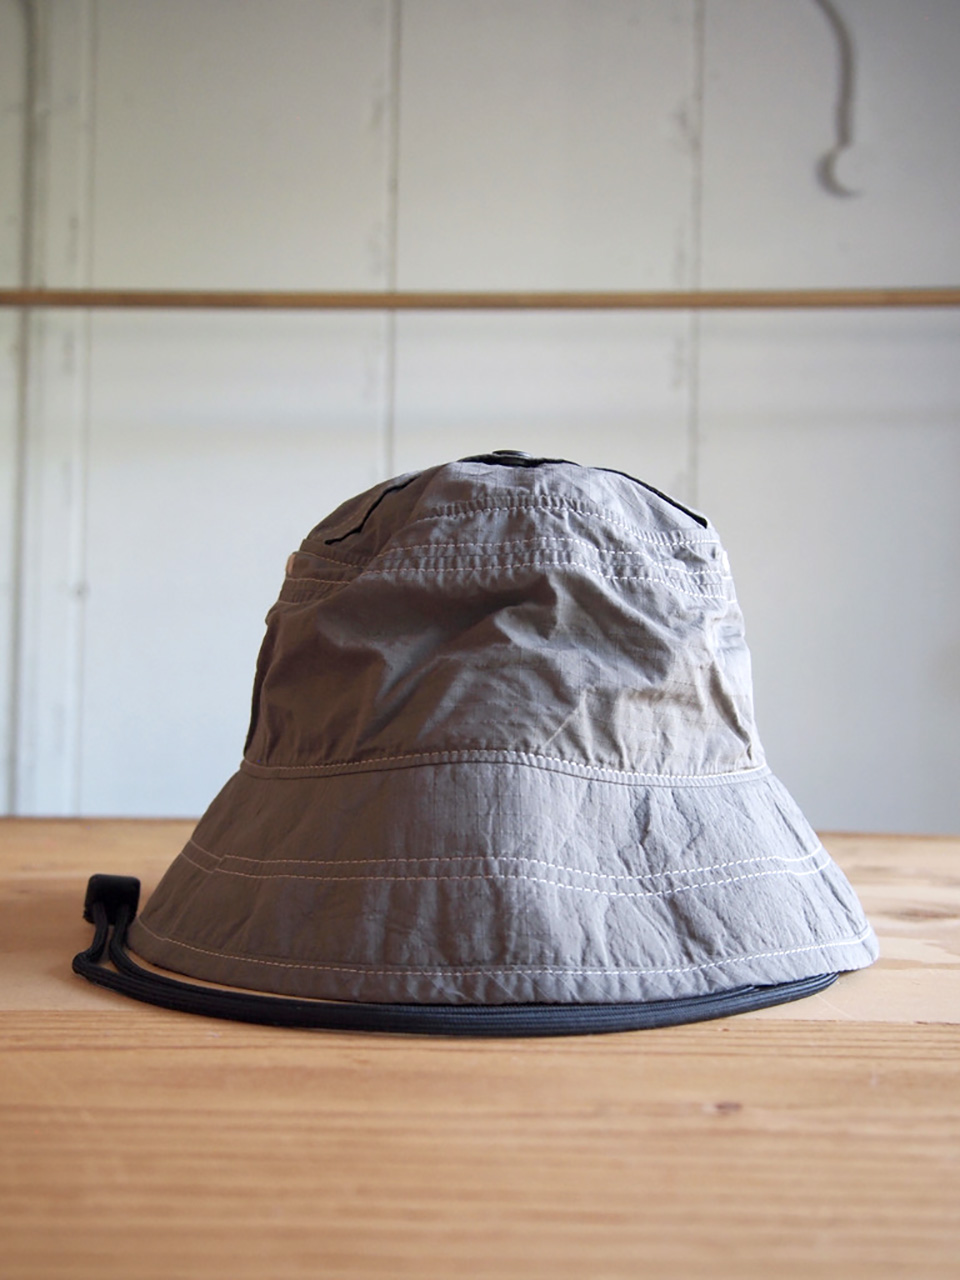 Available tomorrow, NOROLL “OZ LONG BRIM HAT” – notwonderstore